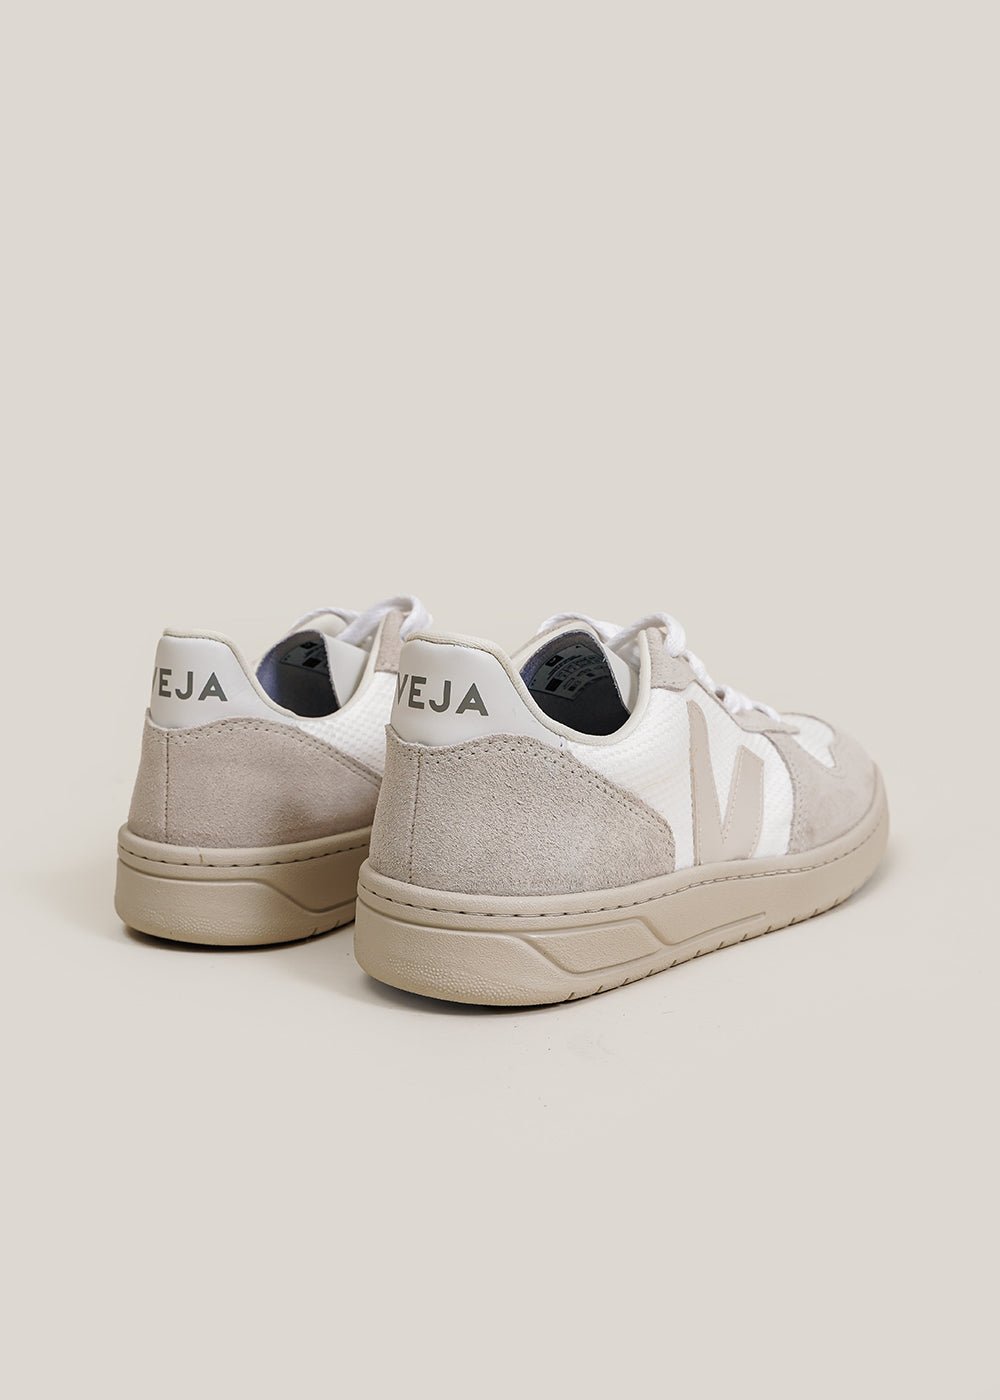 Veja White Natural Pierre V-10 Sneakers - New Classics Studios Sustainable Ethical Fashion Canada